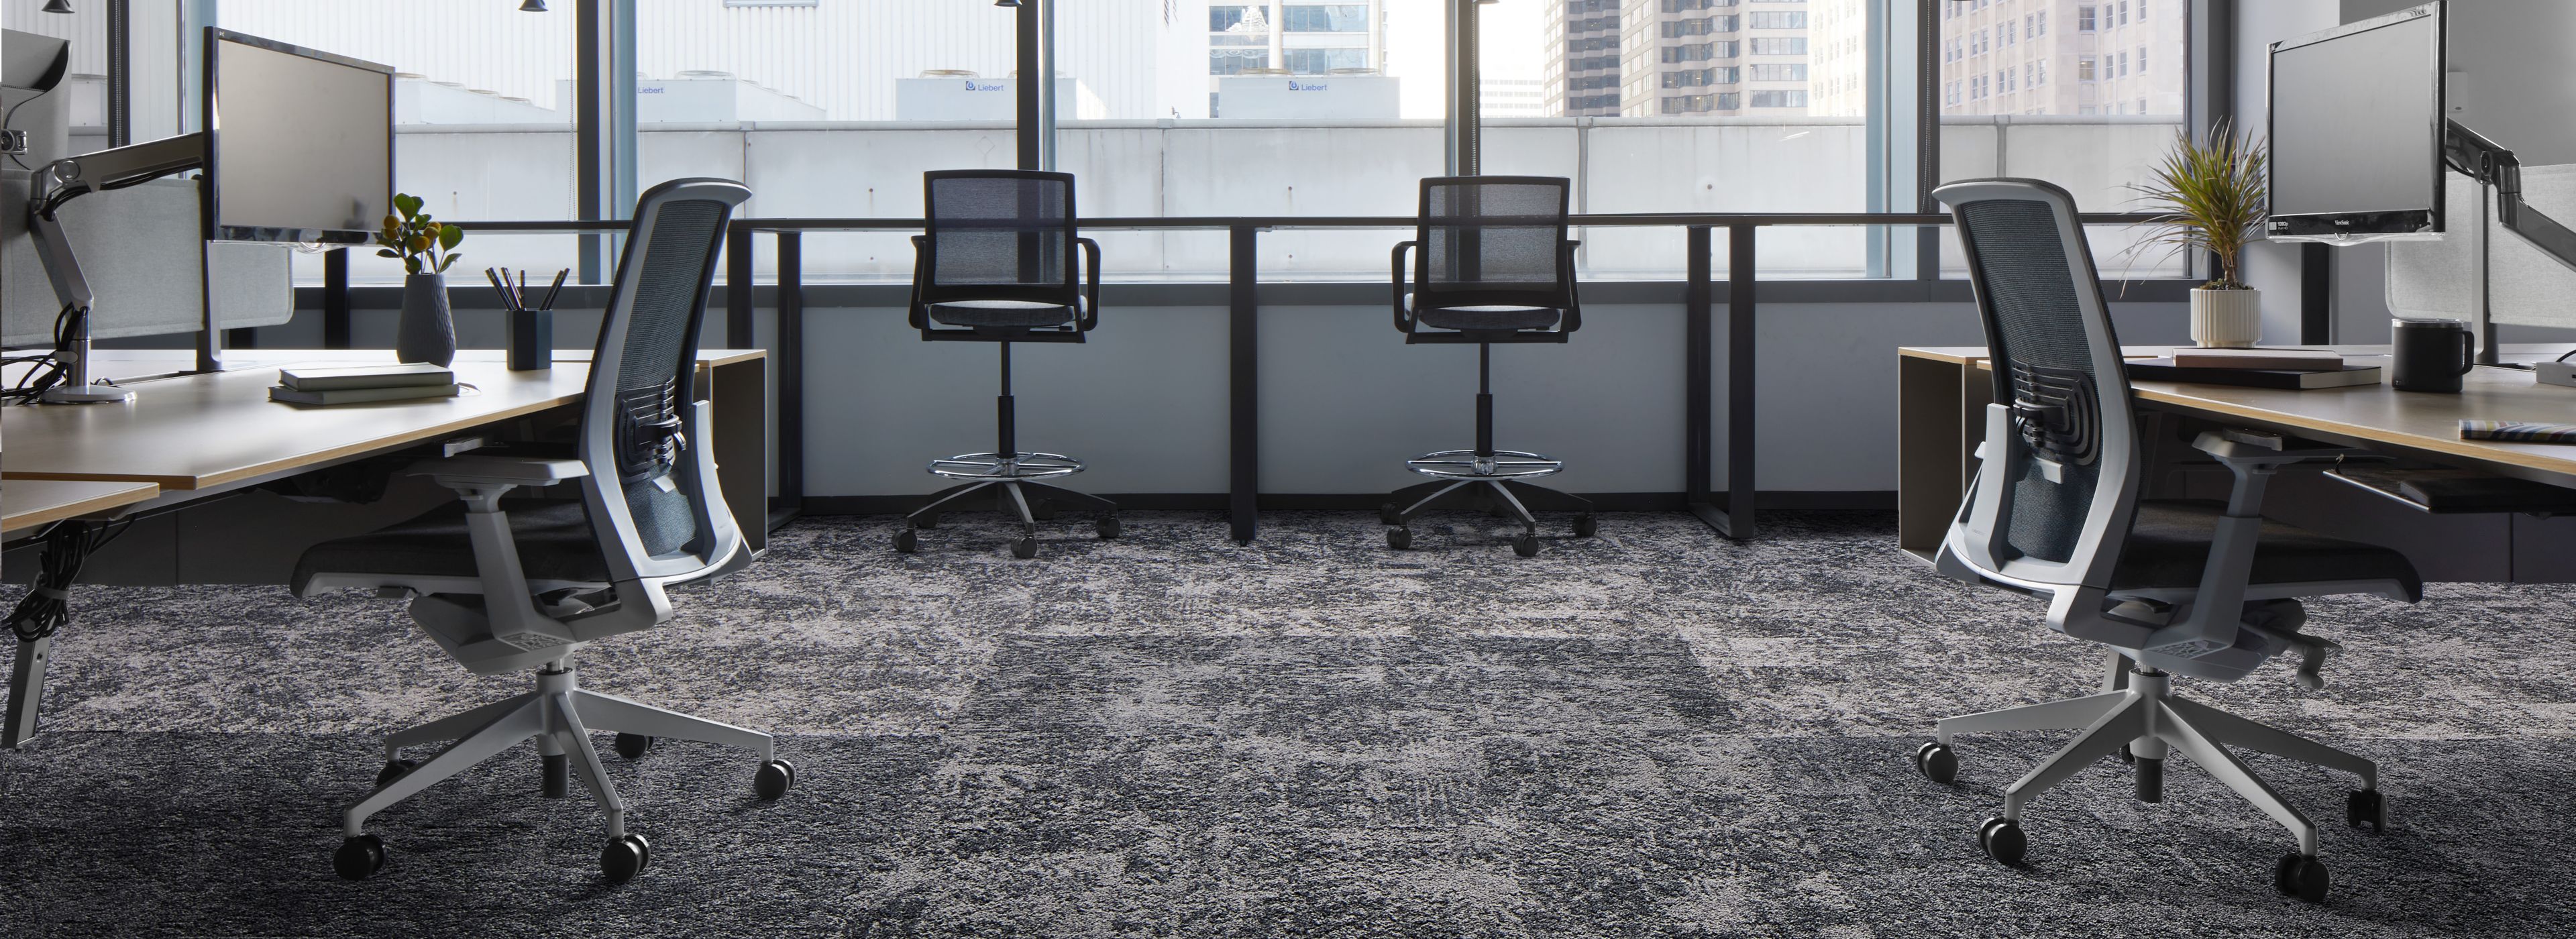 Interface Two To Tango carpet tile in office space image number 1